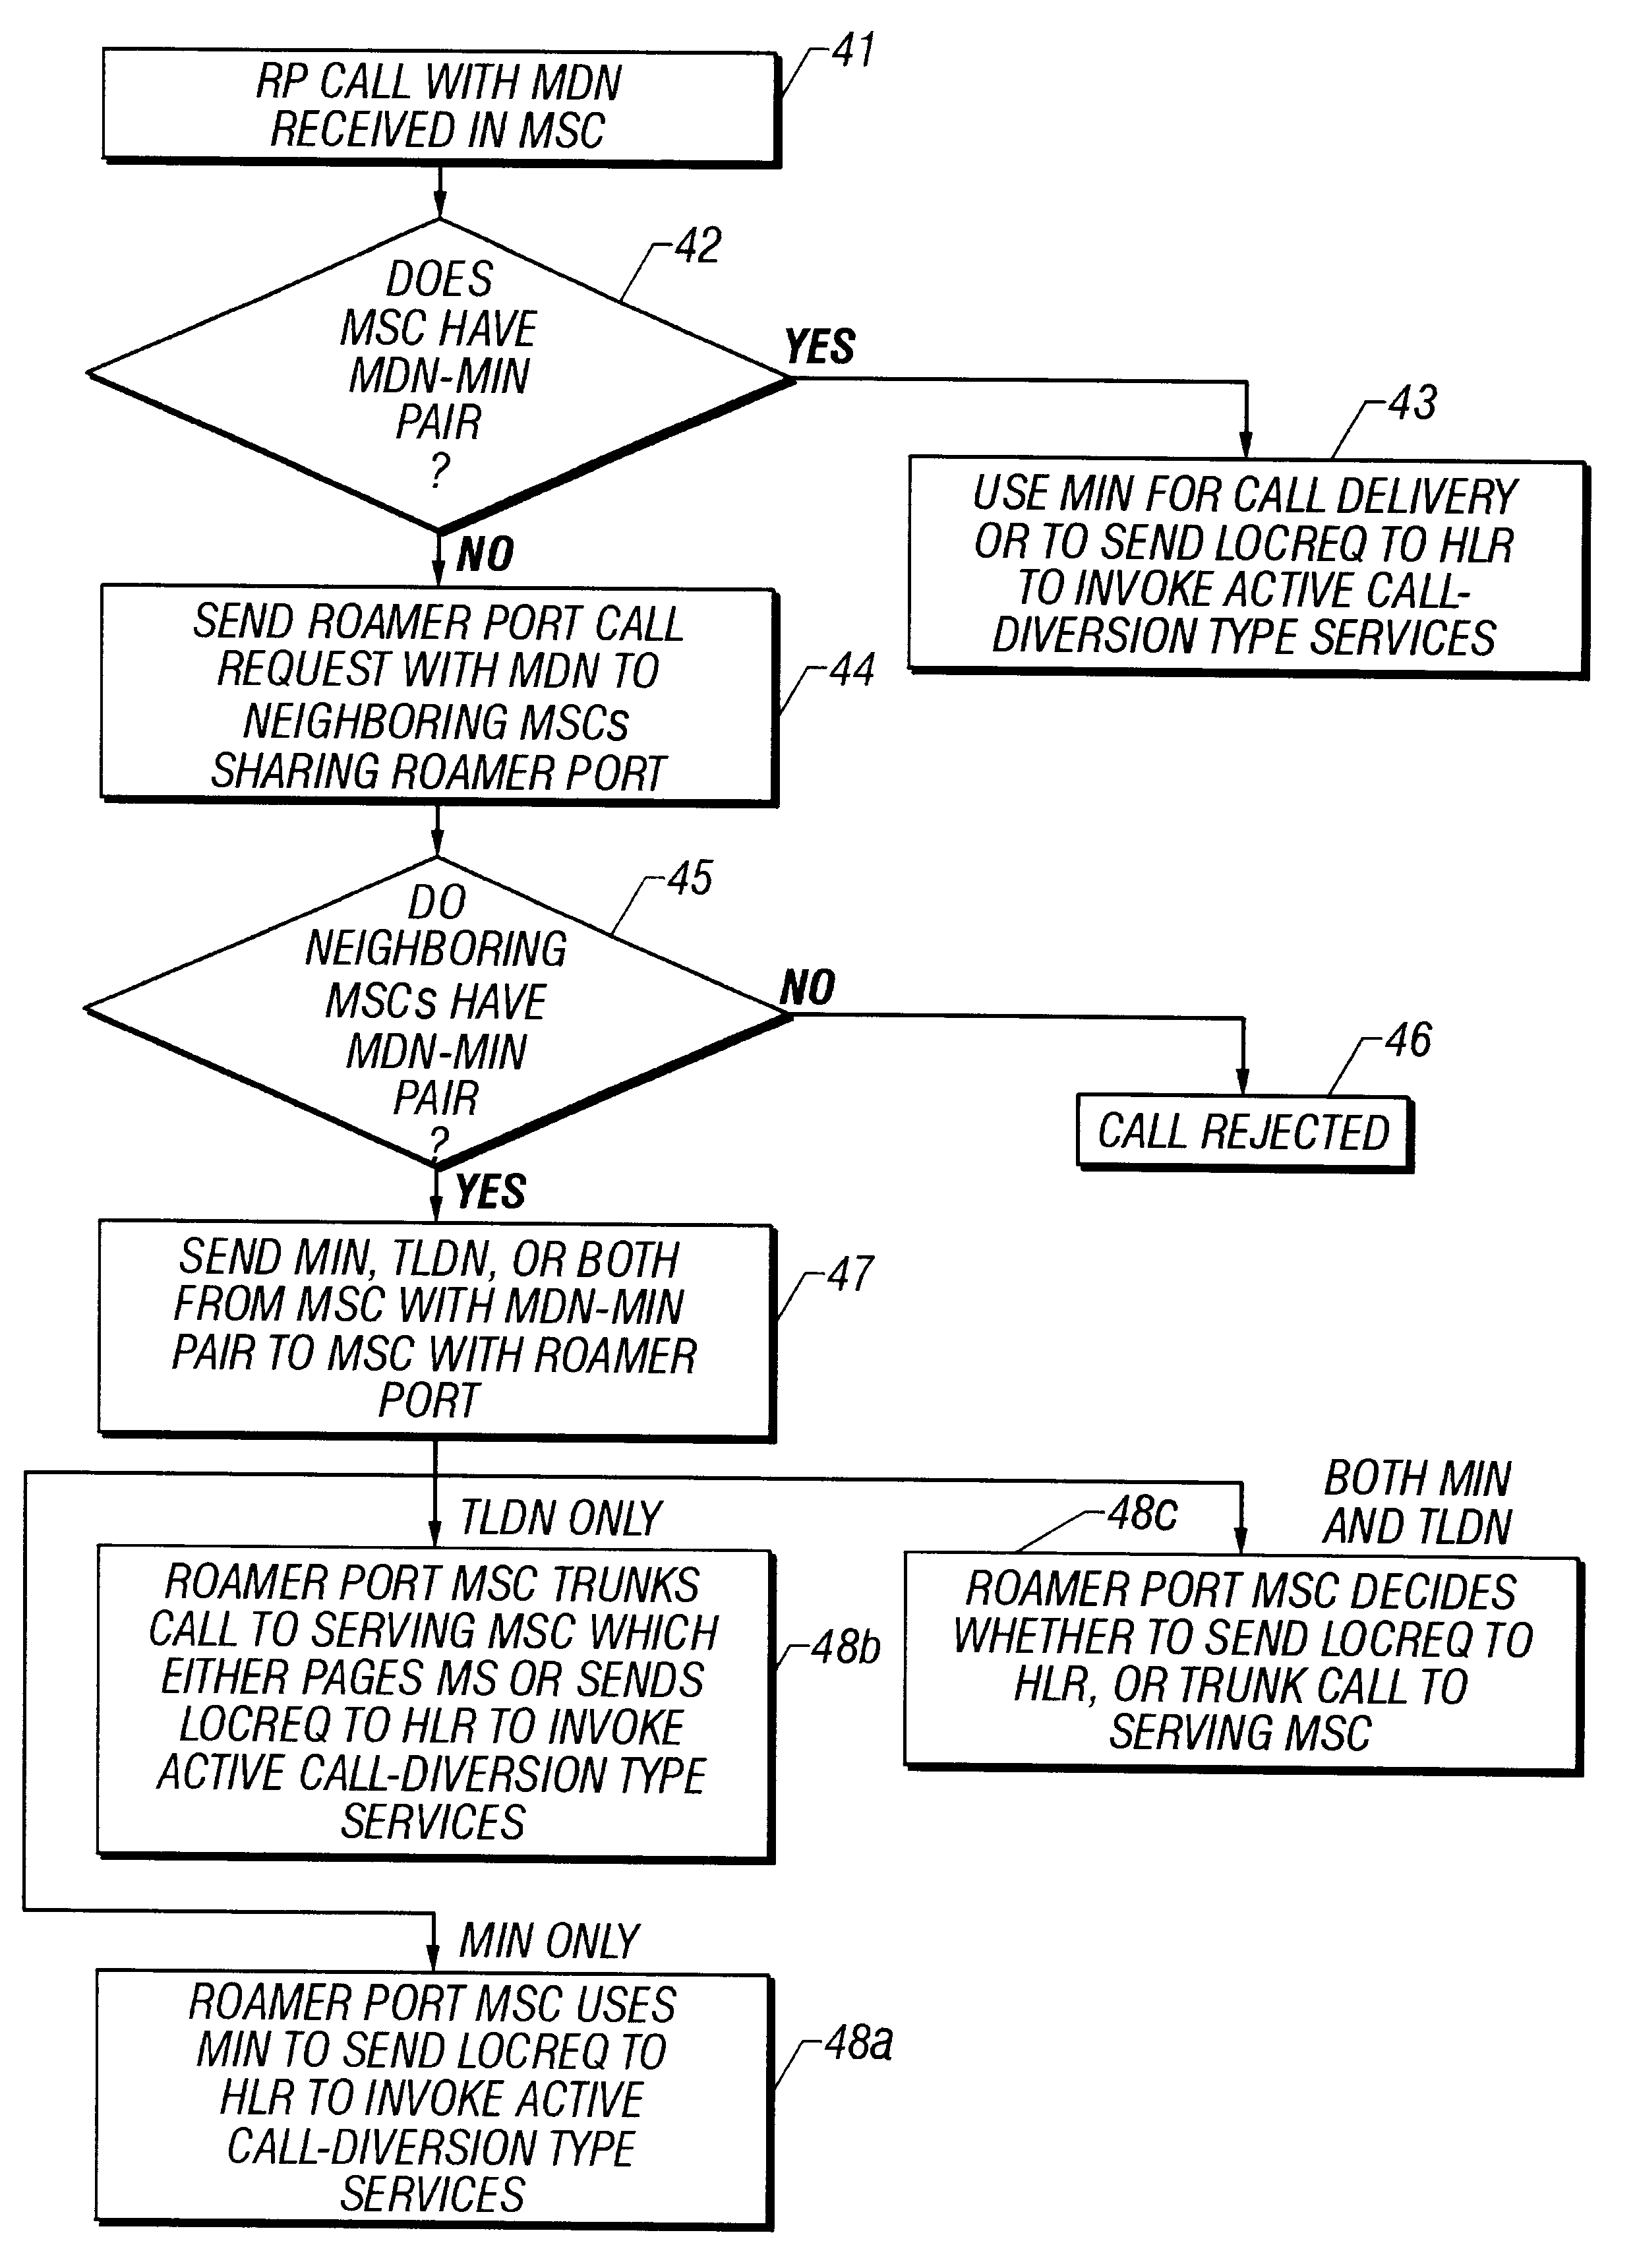 Method of supporting functionality for roamer port calls in a radio telecomminications network in which number portability is implemented